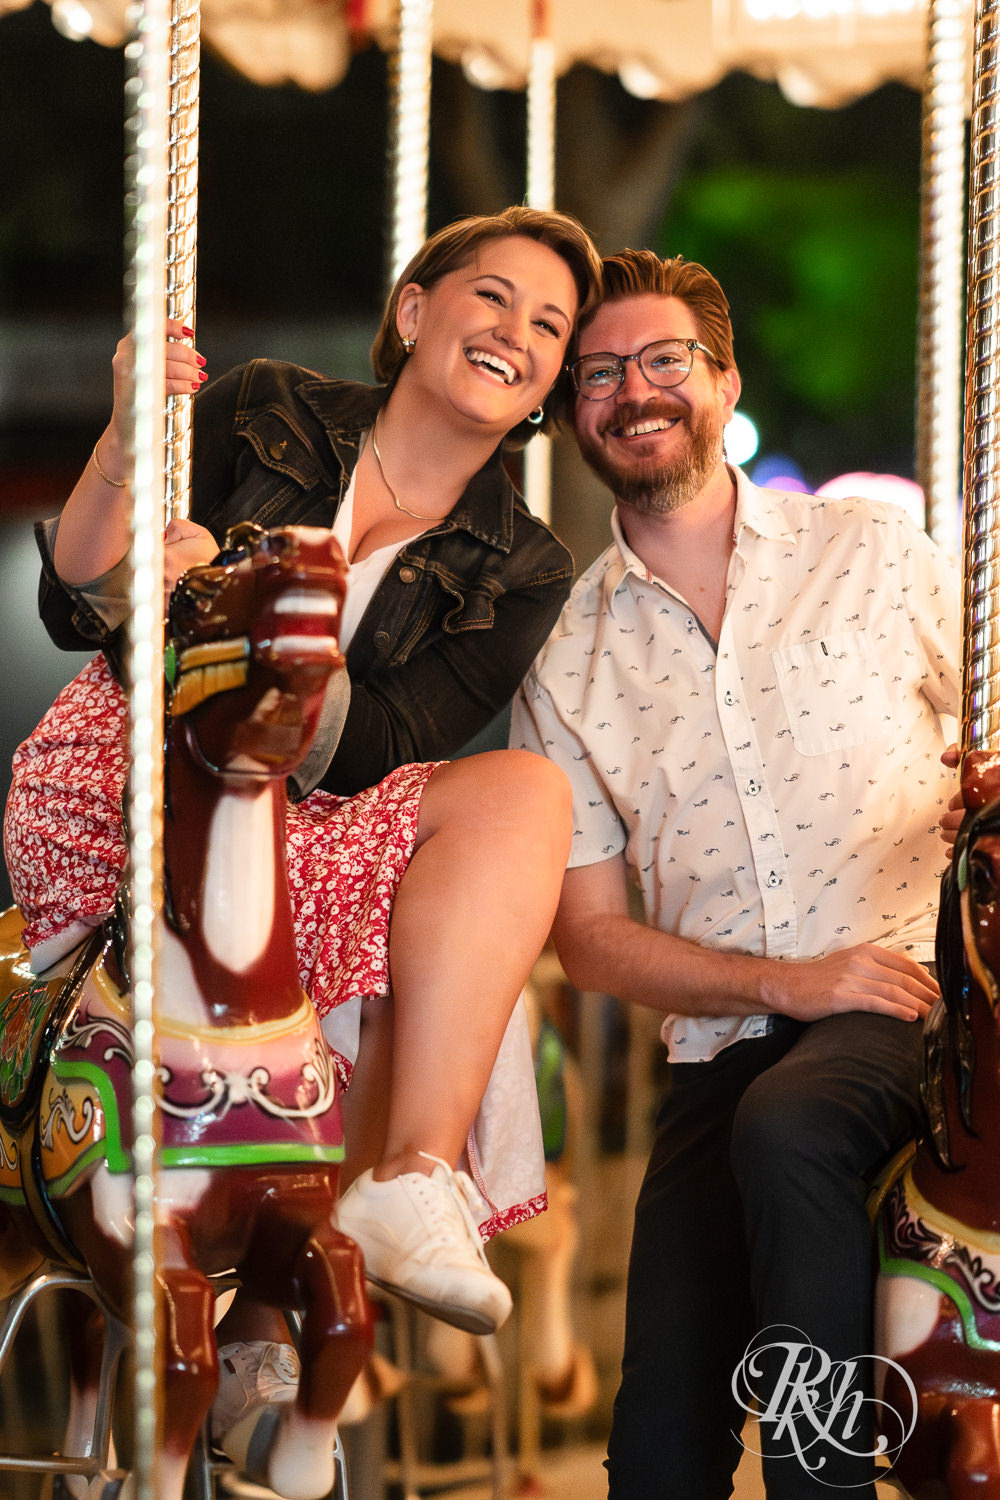 Man and woman ride carousel during their engagement photography at the Minnesota State Fair. 